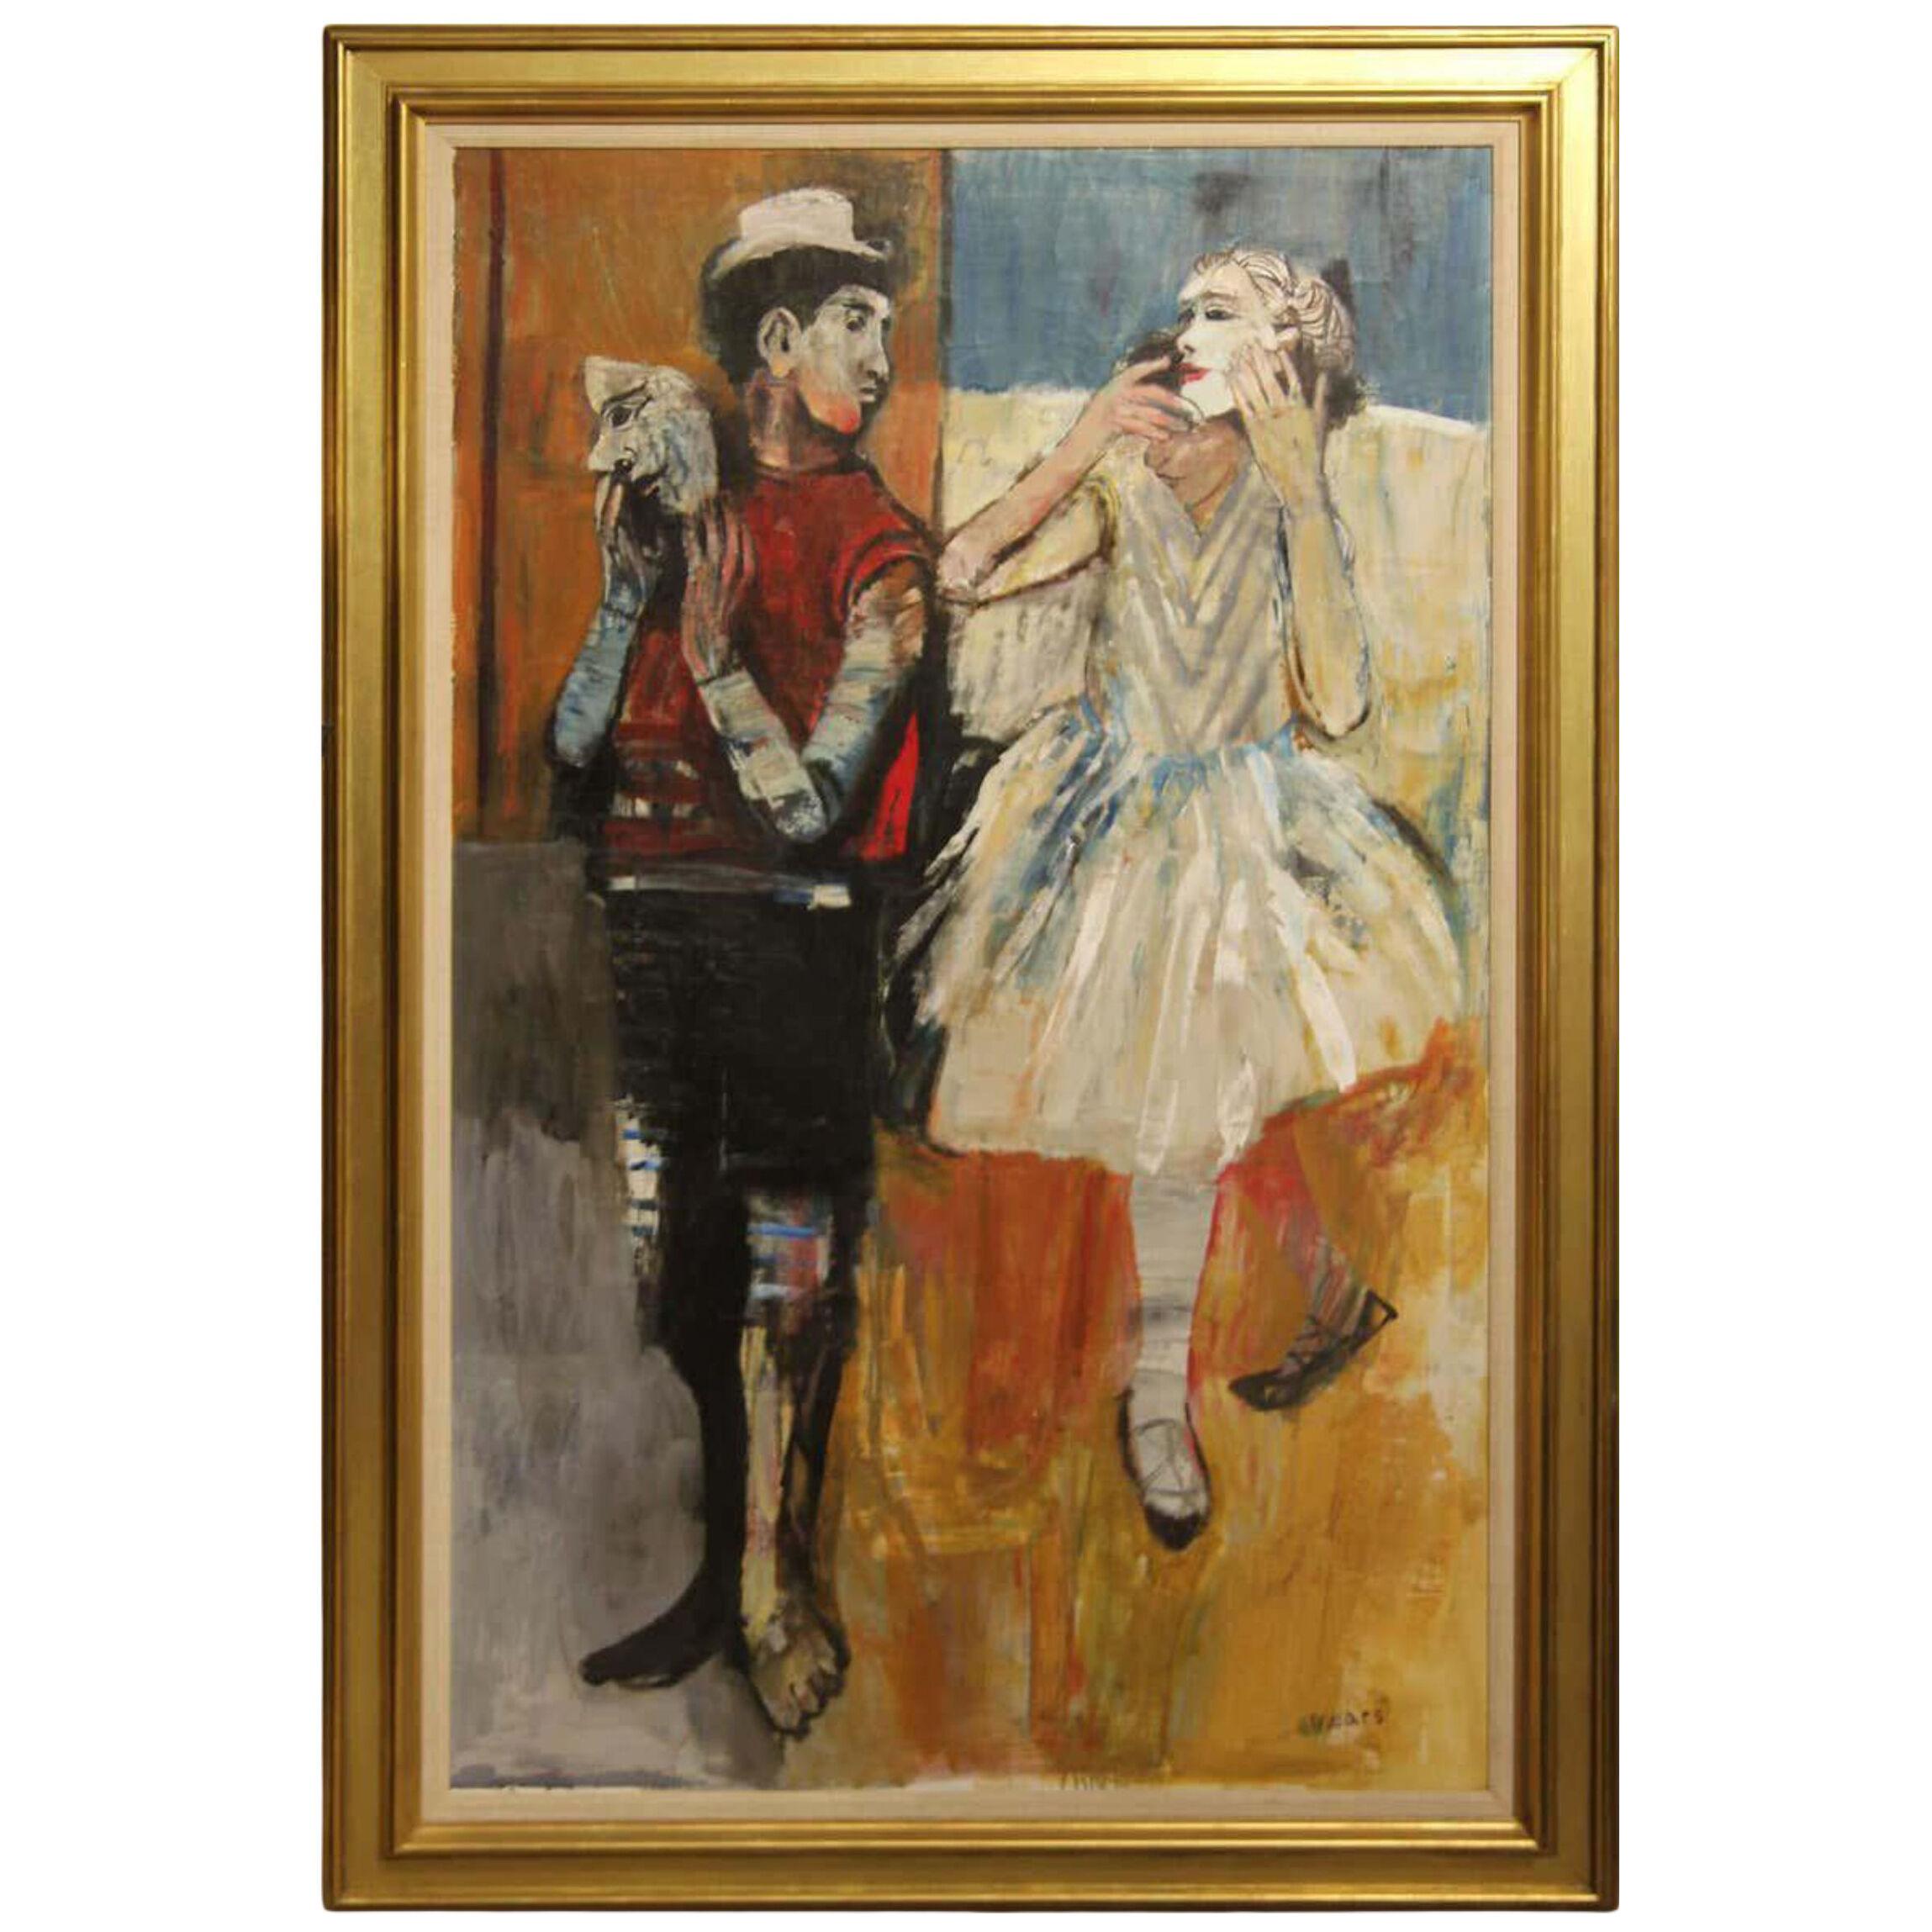 1960 "Two Figures Unmasked" Figurative Oil Painting by Herbert Mears, Framed